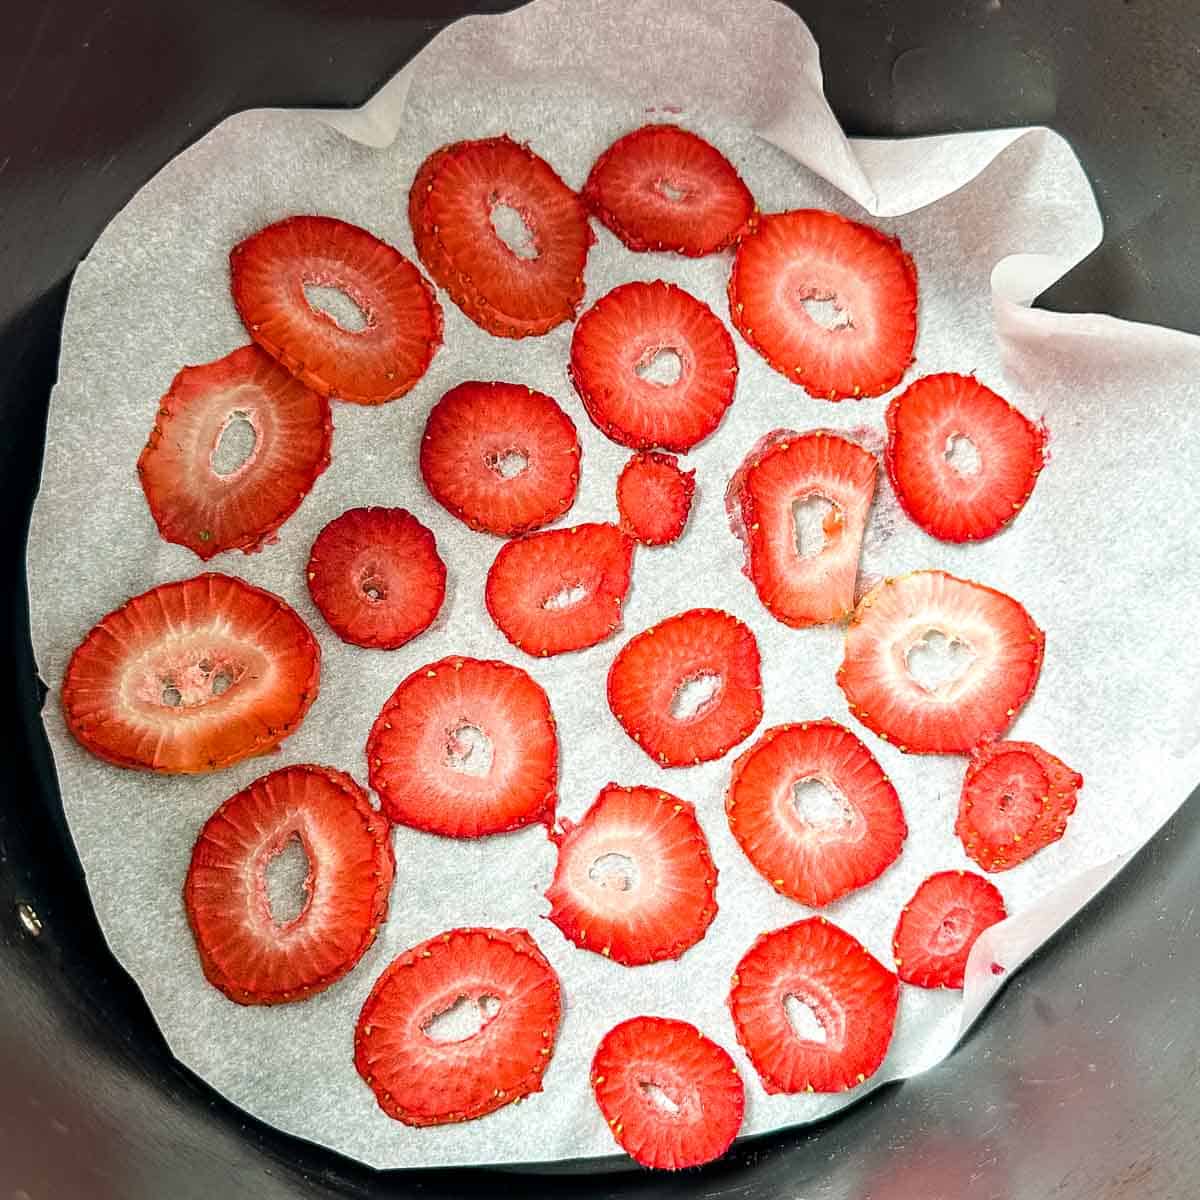 Partially dehydrated strawberry slices arranged in a single layer on parchment paper in an air fryer basket.